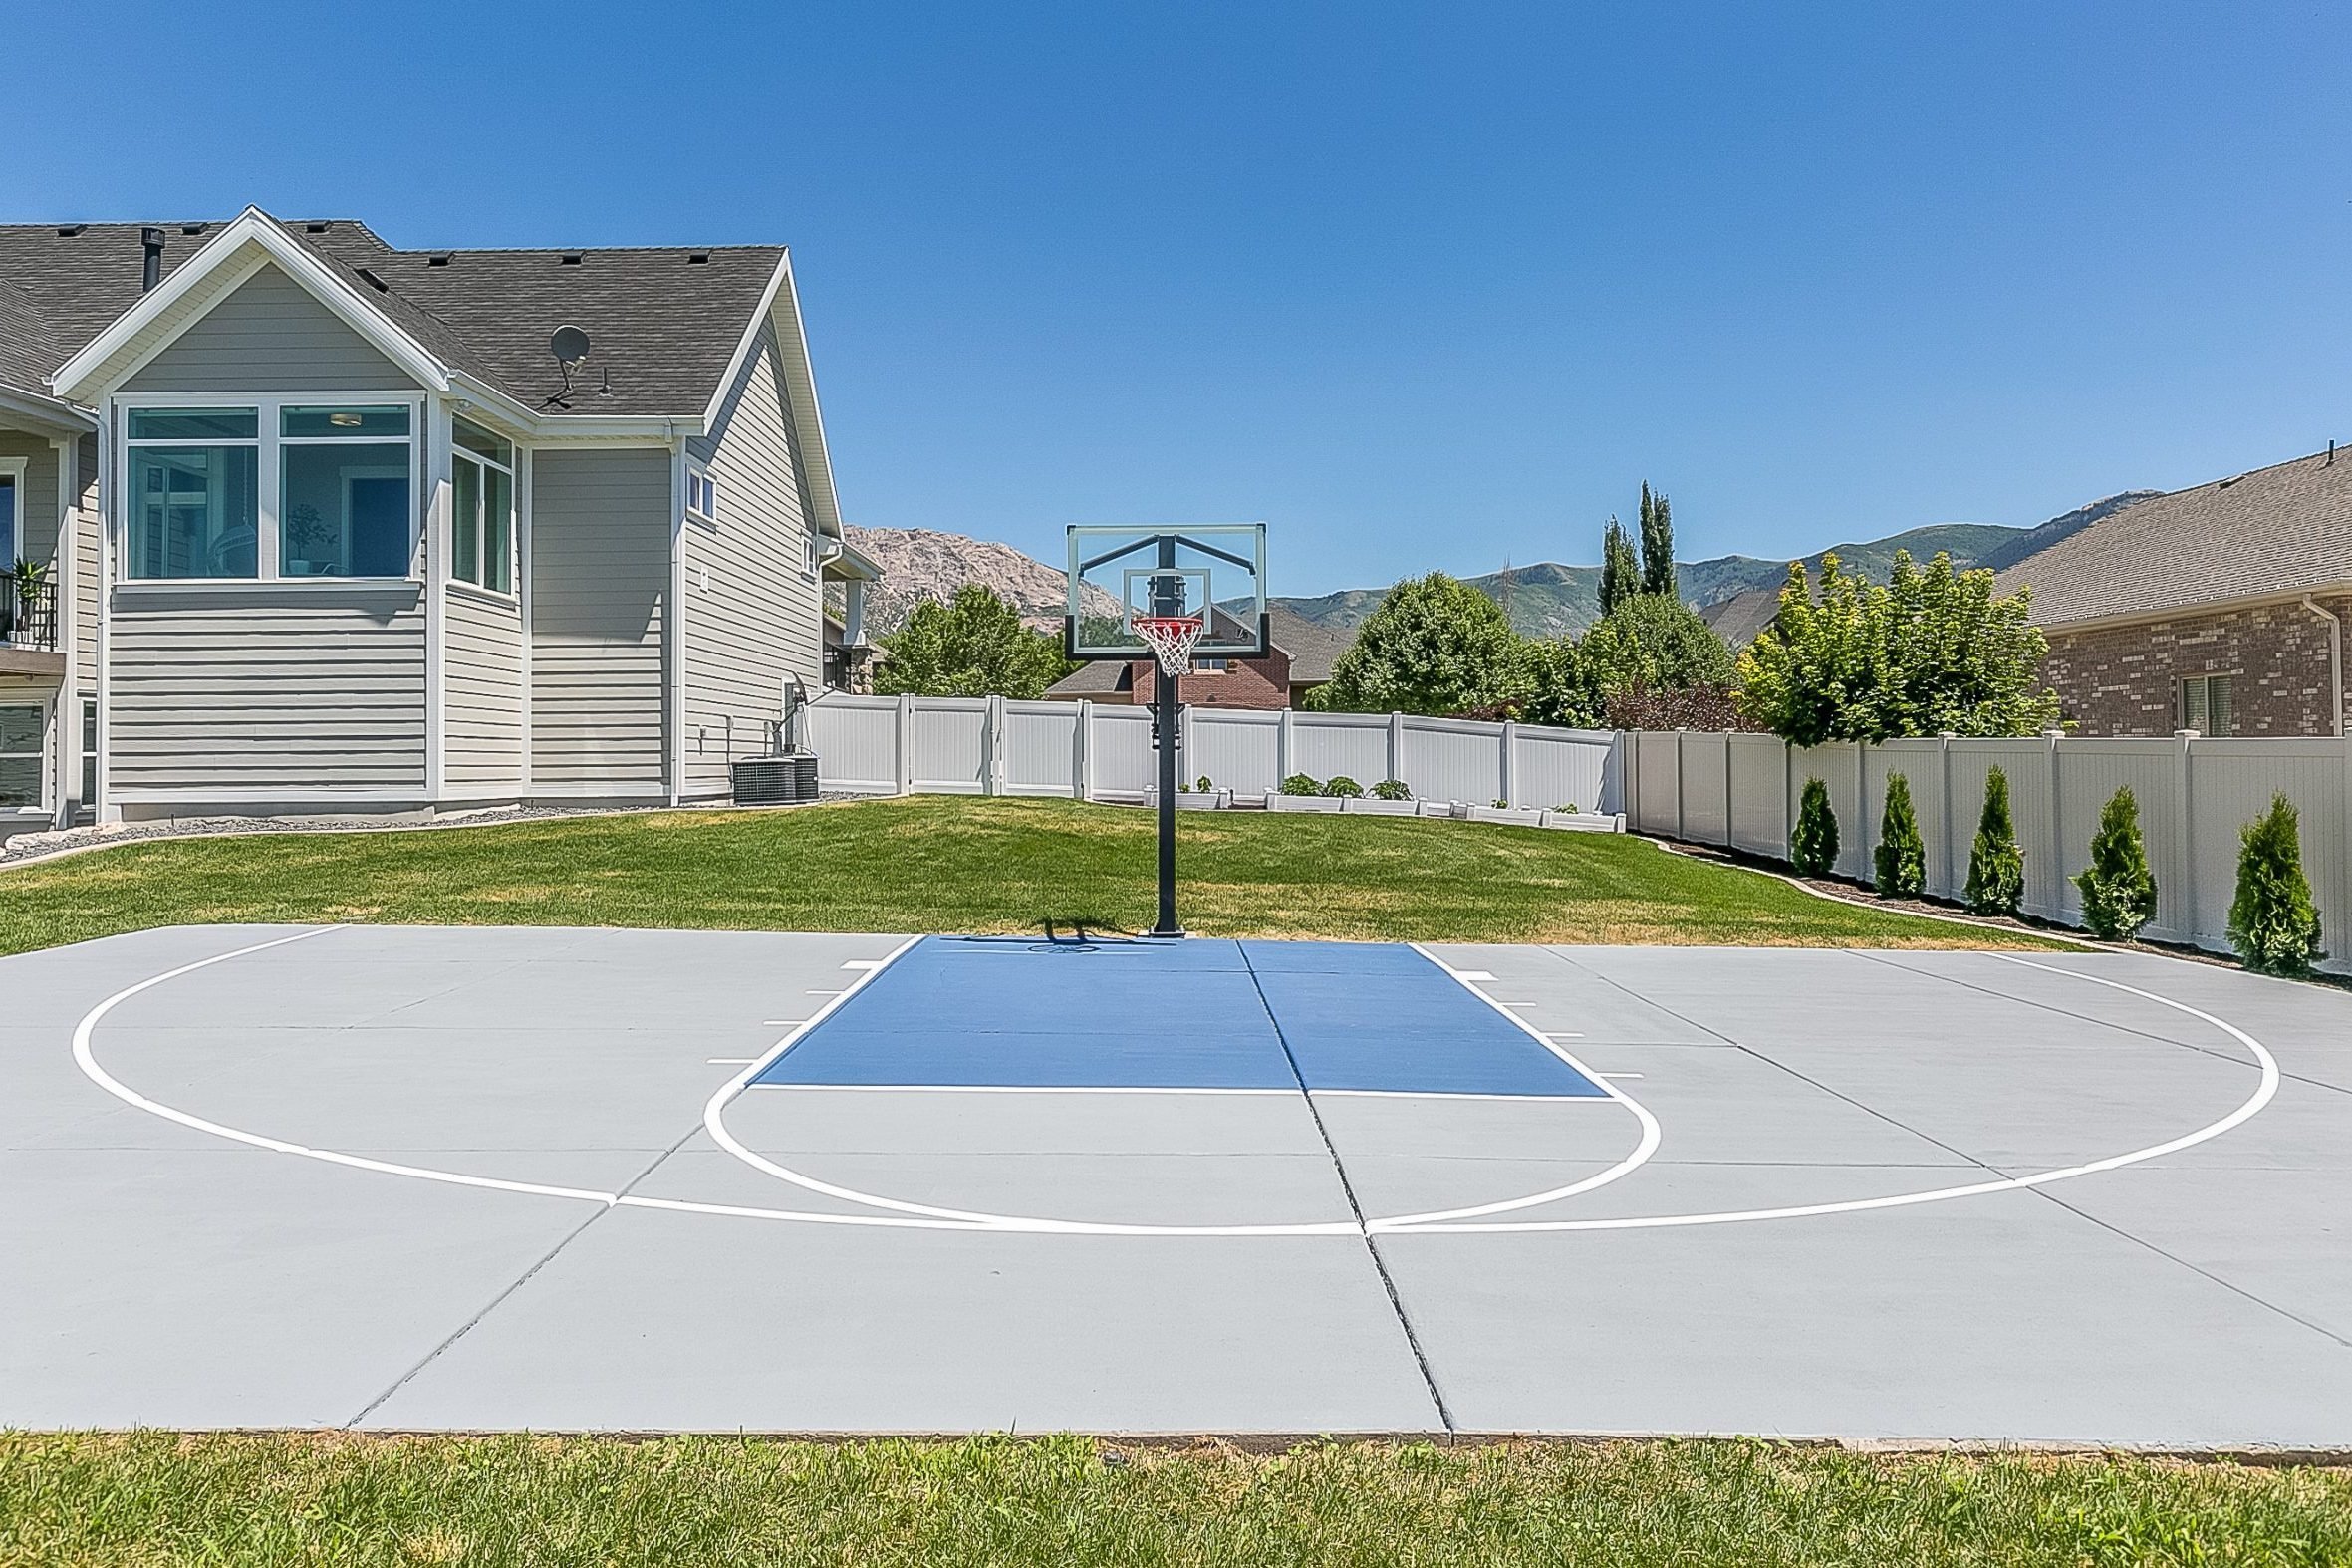 A Guide for How To Build a Backyard Basketball Court Family Handyman